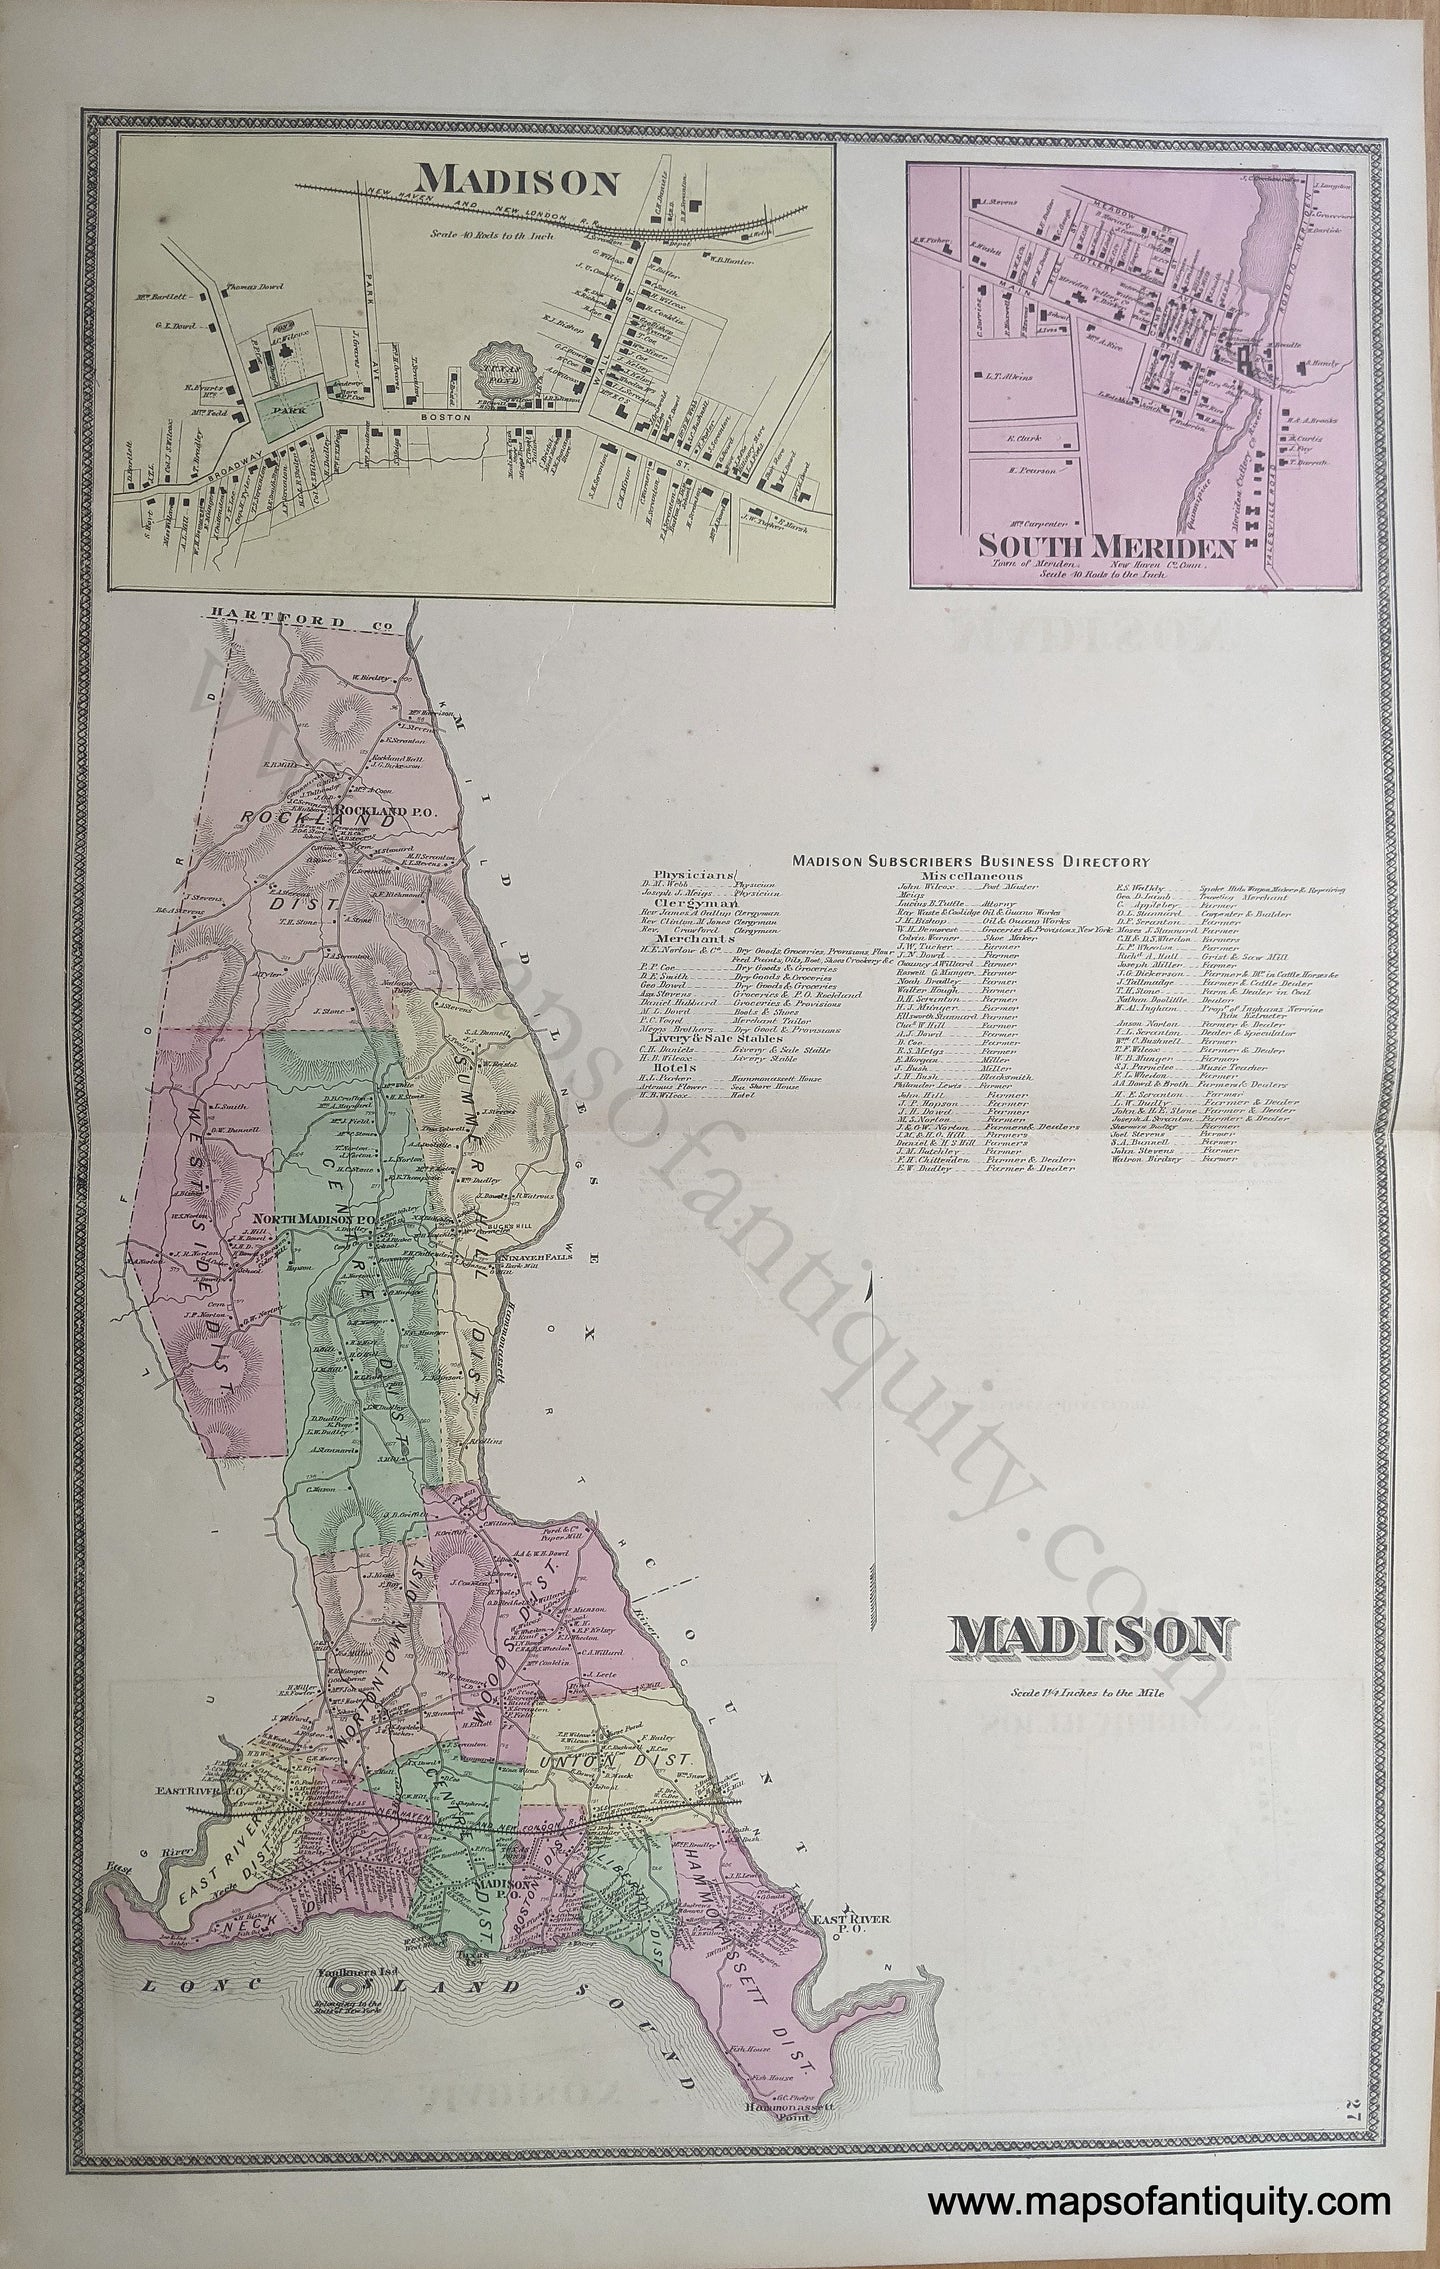 Genuine-Antique-Hand-Colored-Map-Madison--(CT)--1868-Beers-Maps-Of-Antiquity-1800s-19th-century